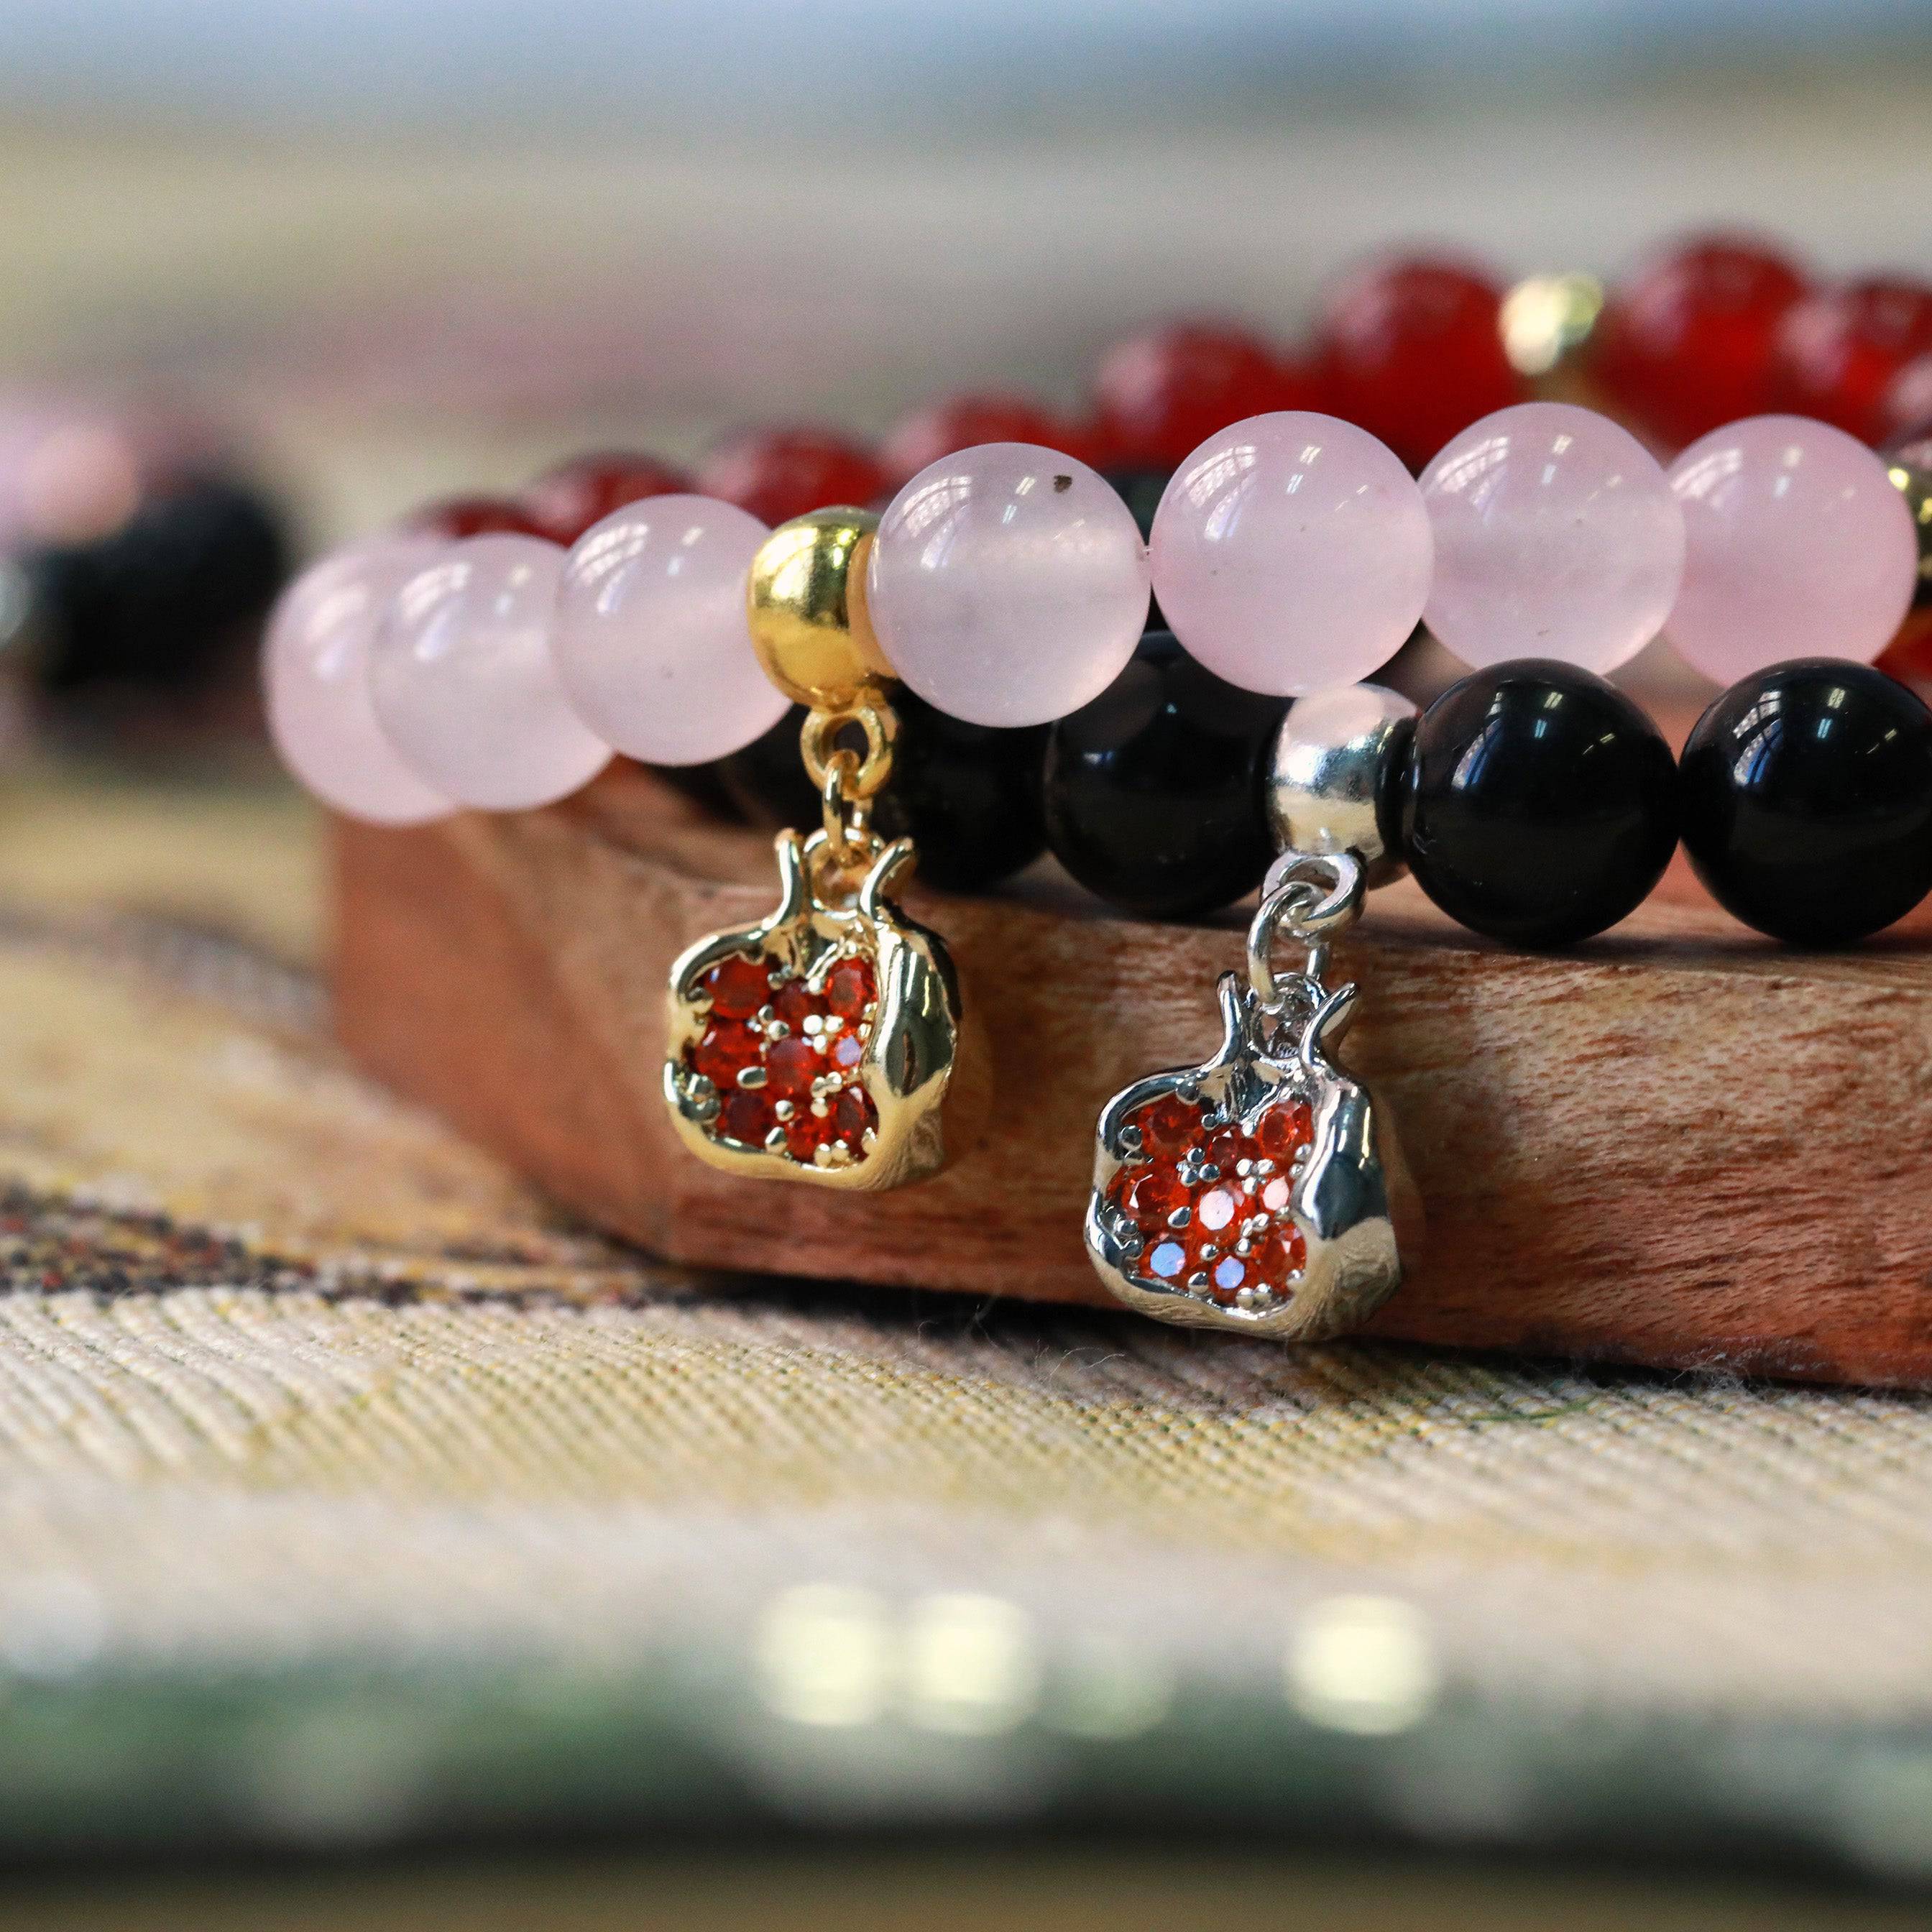 pomegranate gemstone stretchy charm bracelet in gold or silver inspired by Persephone and Hecate closeup